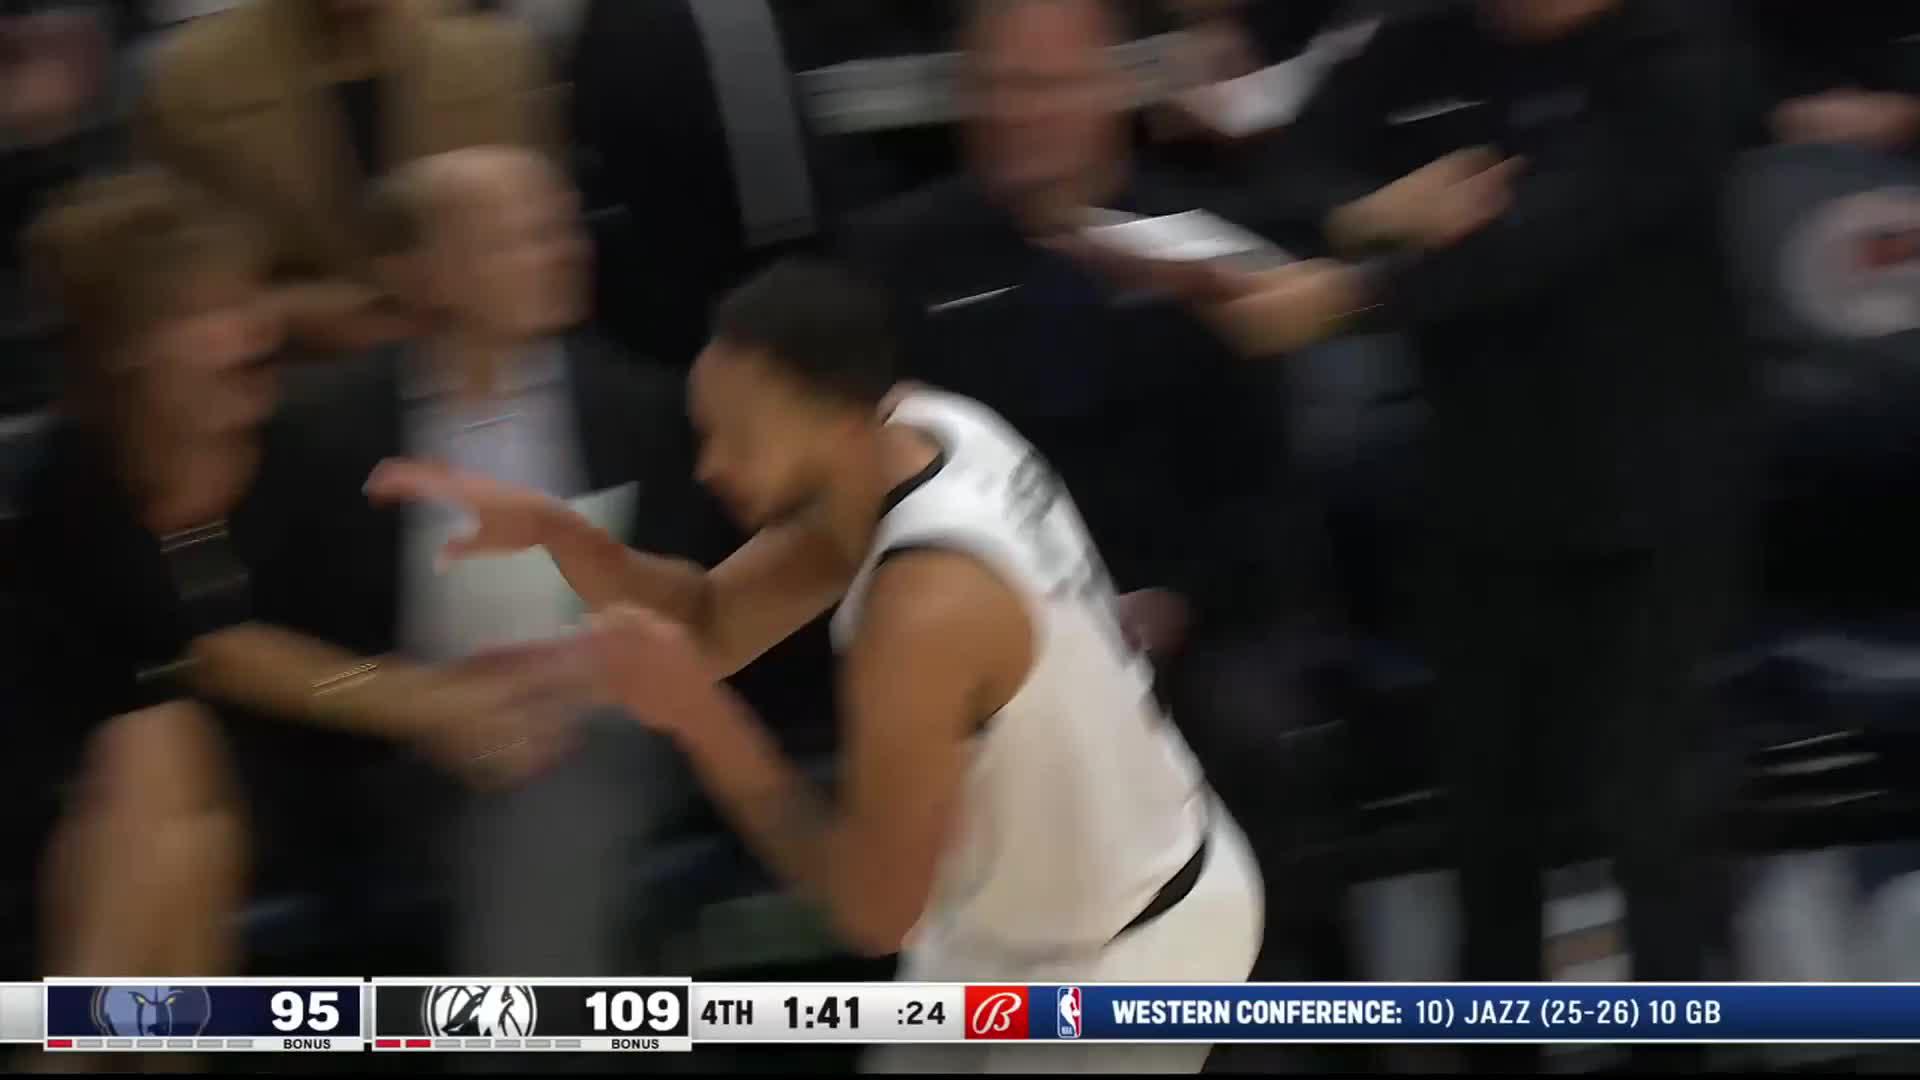 Top Play from Kyle Anderson